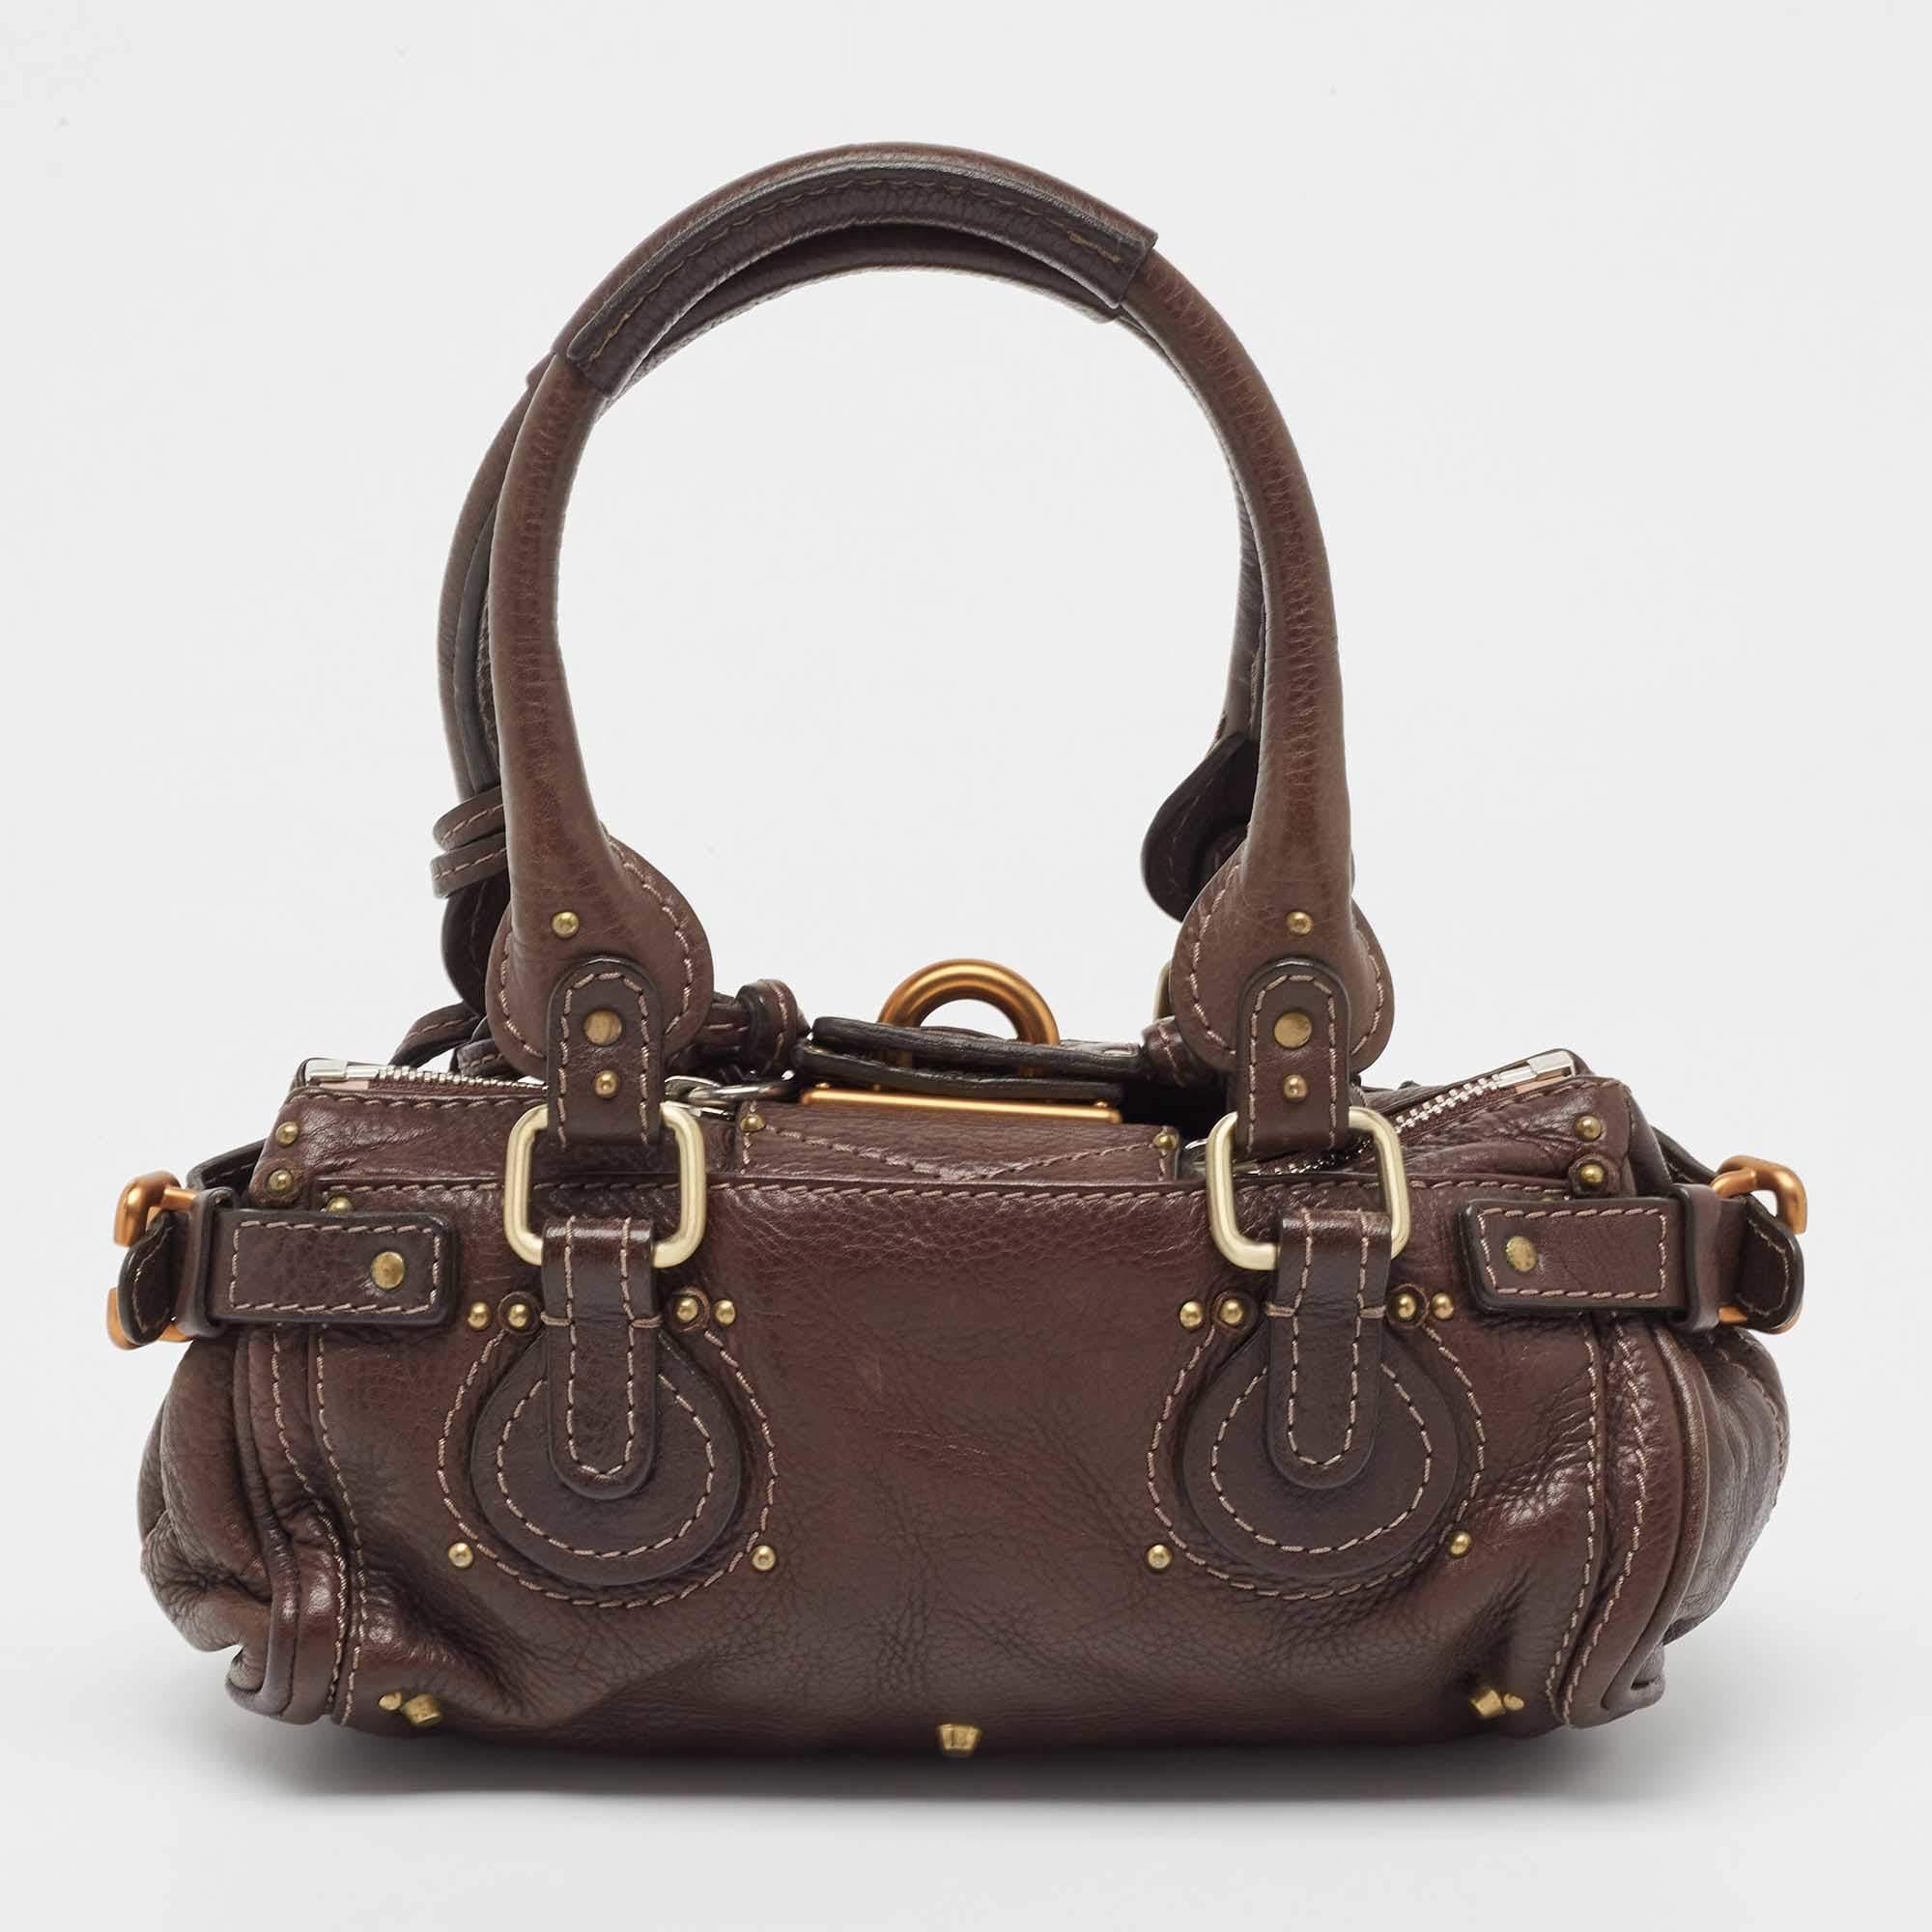 Chloe brings a signature touch to this creation made by the best just for you. Durable and stylish, this leather satchel will take you through your day with ease. The two handles are for you to carry it and the fabric lining makes it perfect to stow